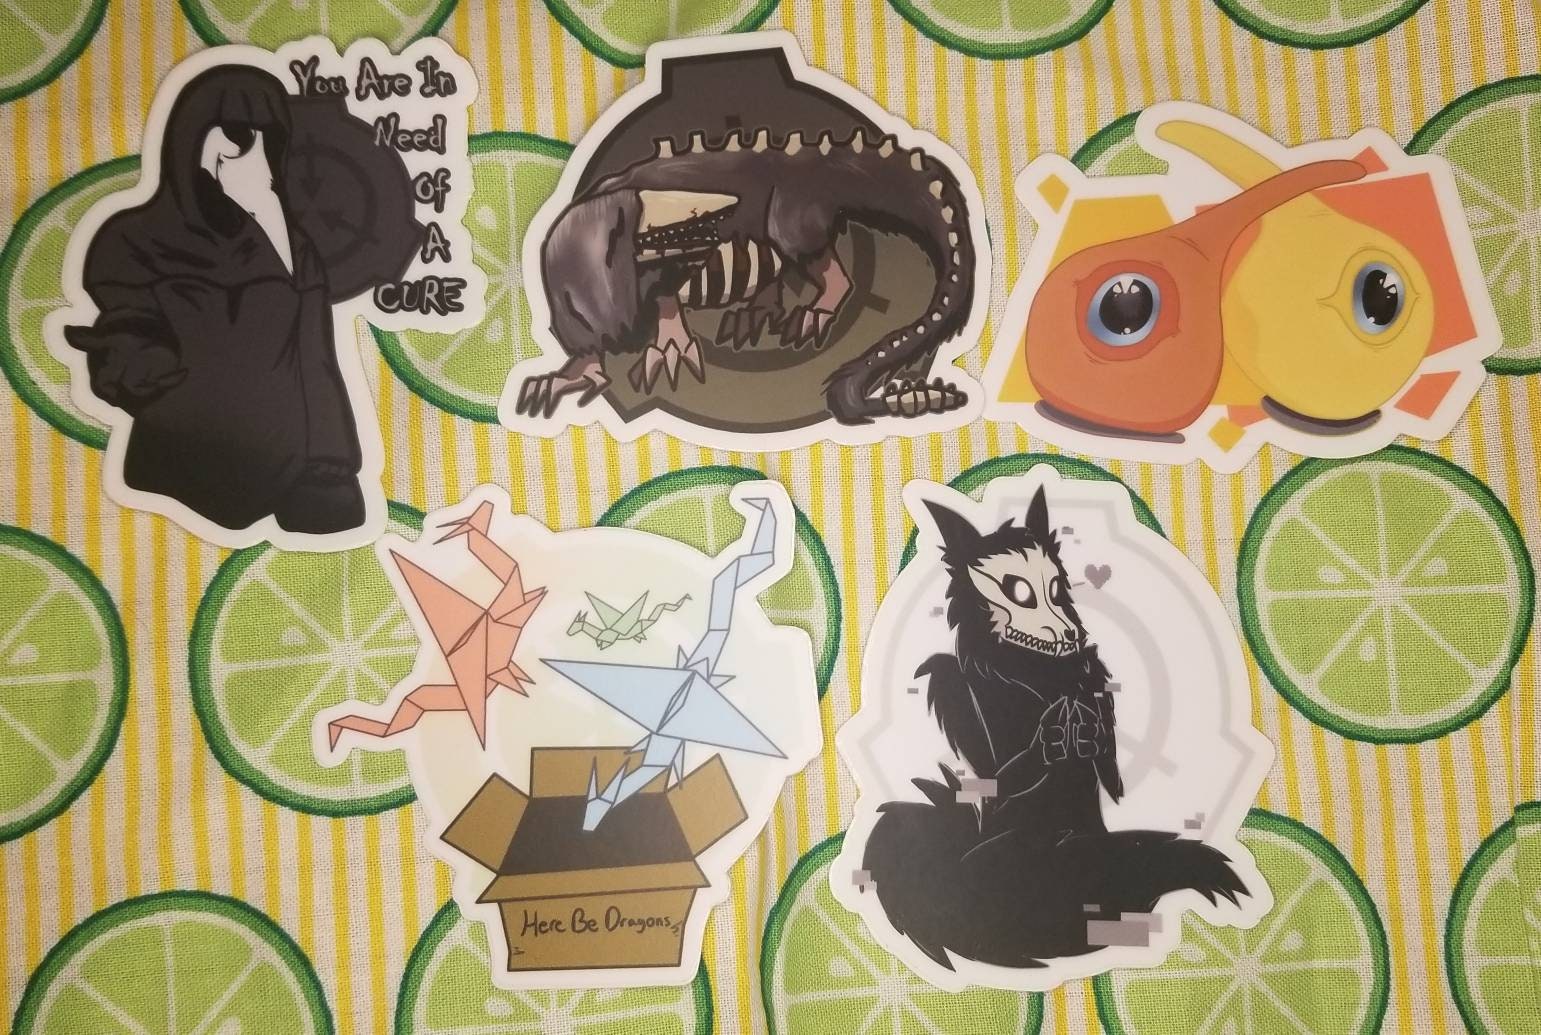 Scp 1471 Stickers for Sale